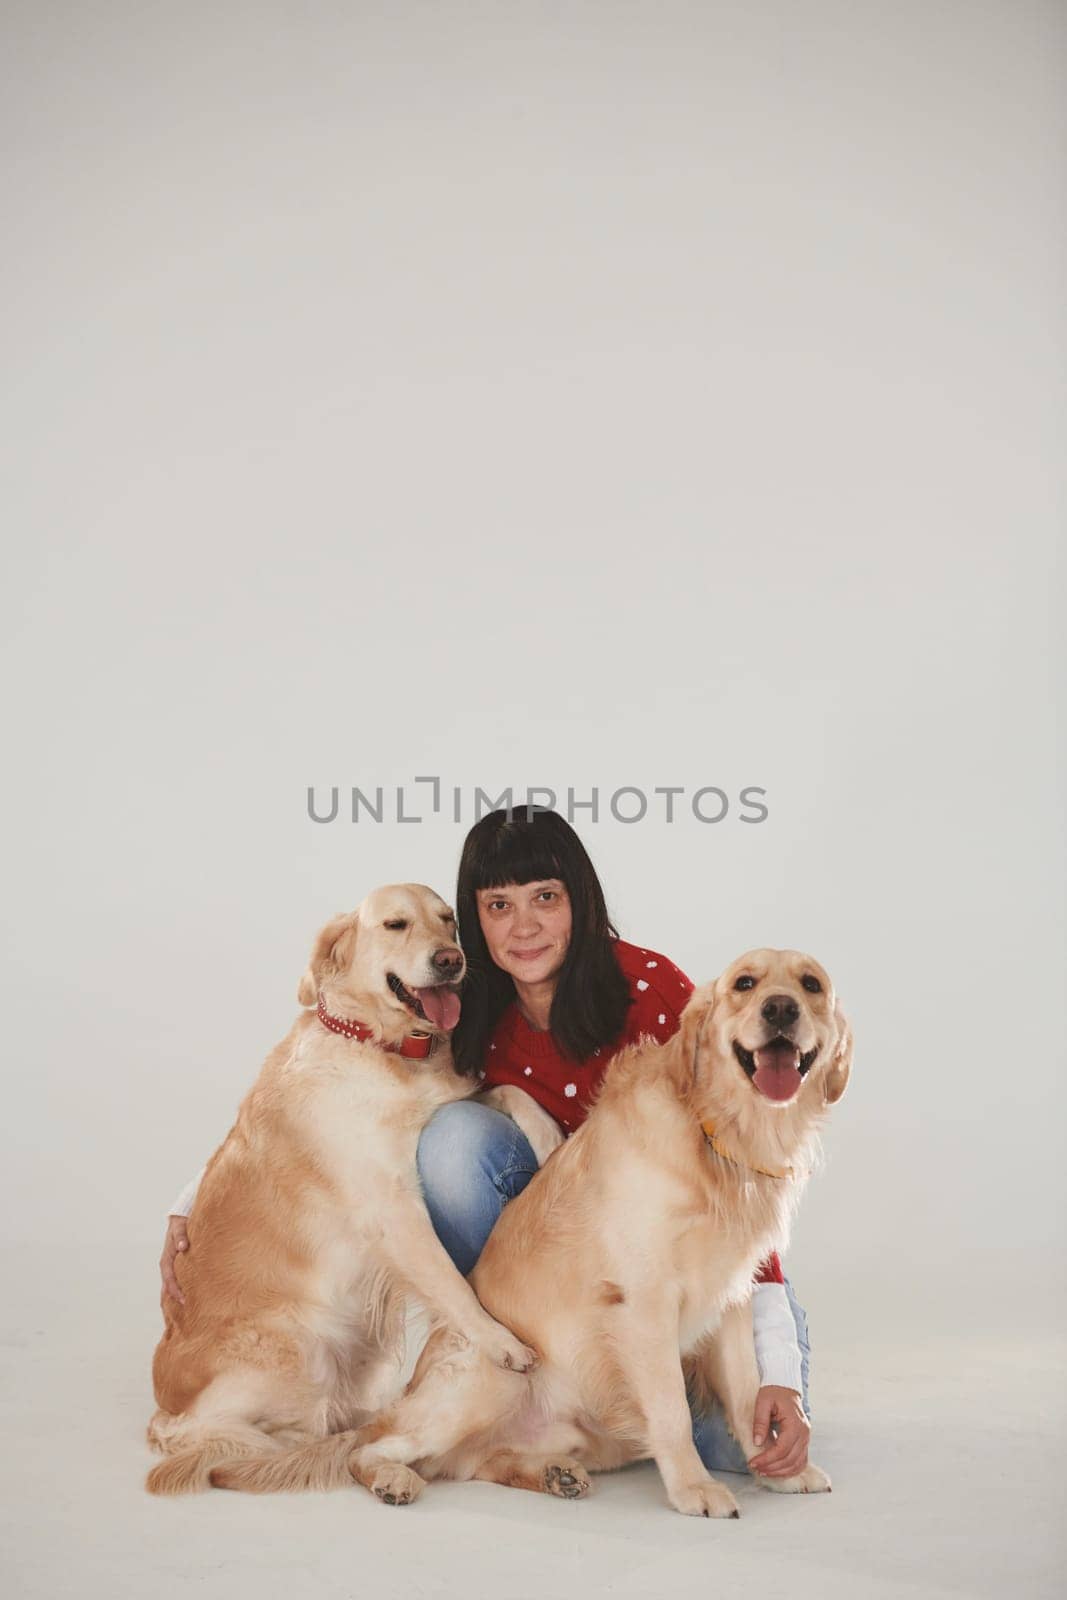 Woman is with her two Golden retrievers in the studio against white background by Standret